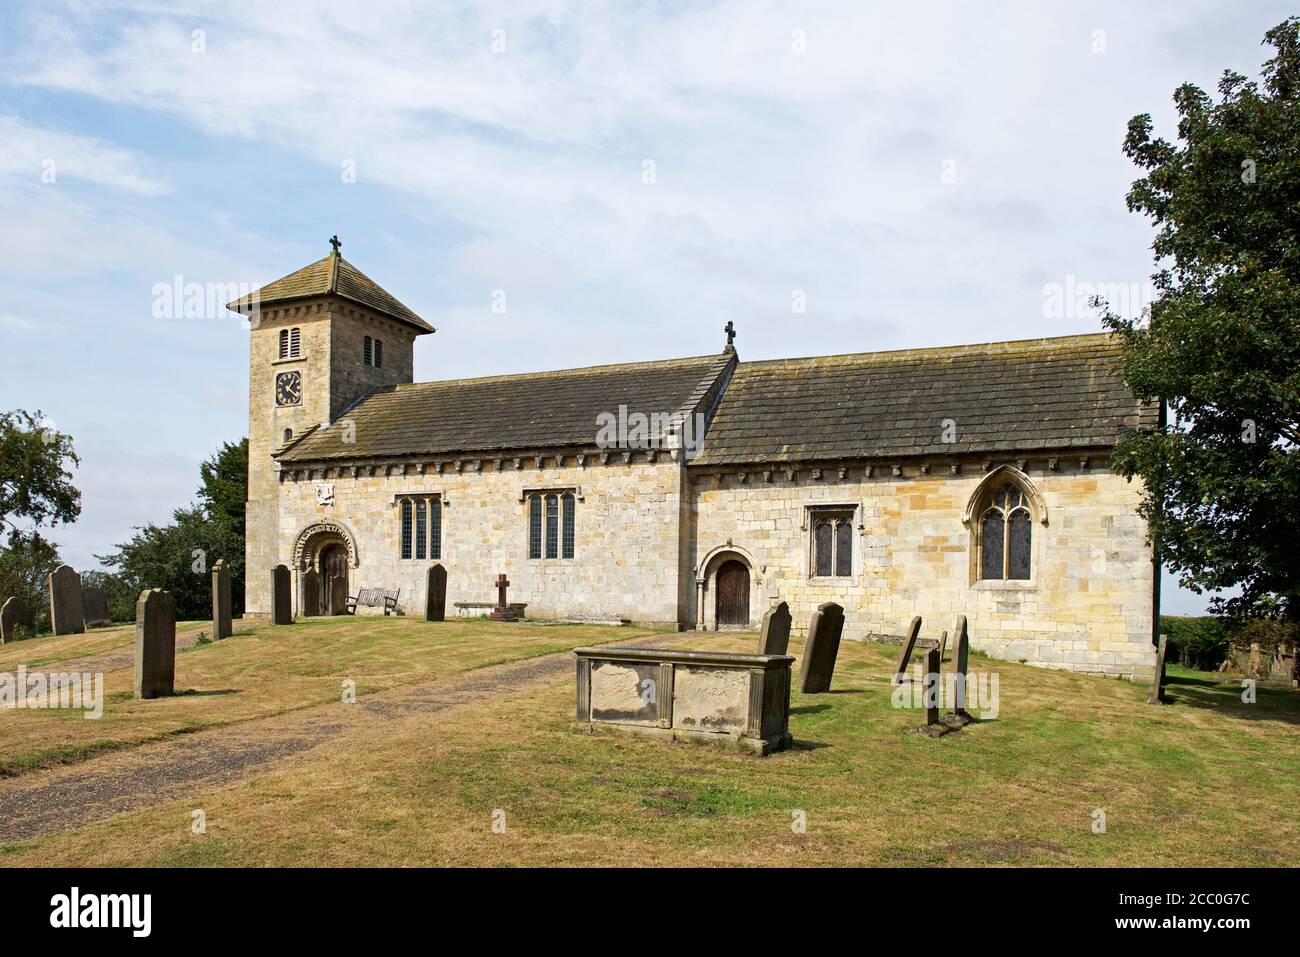 The Church of St John the Baptist, in the village of Healaugh, North Yorkshire, England UK Stock Photo